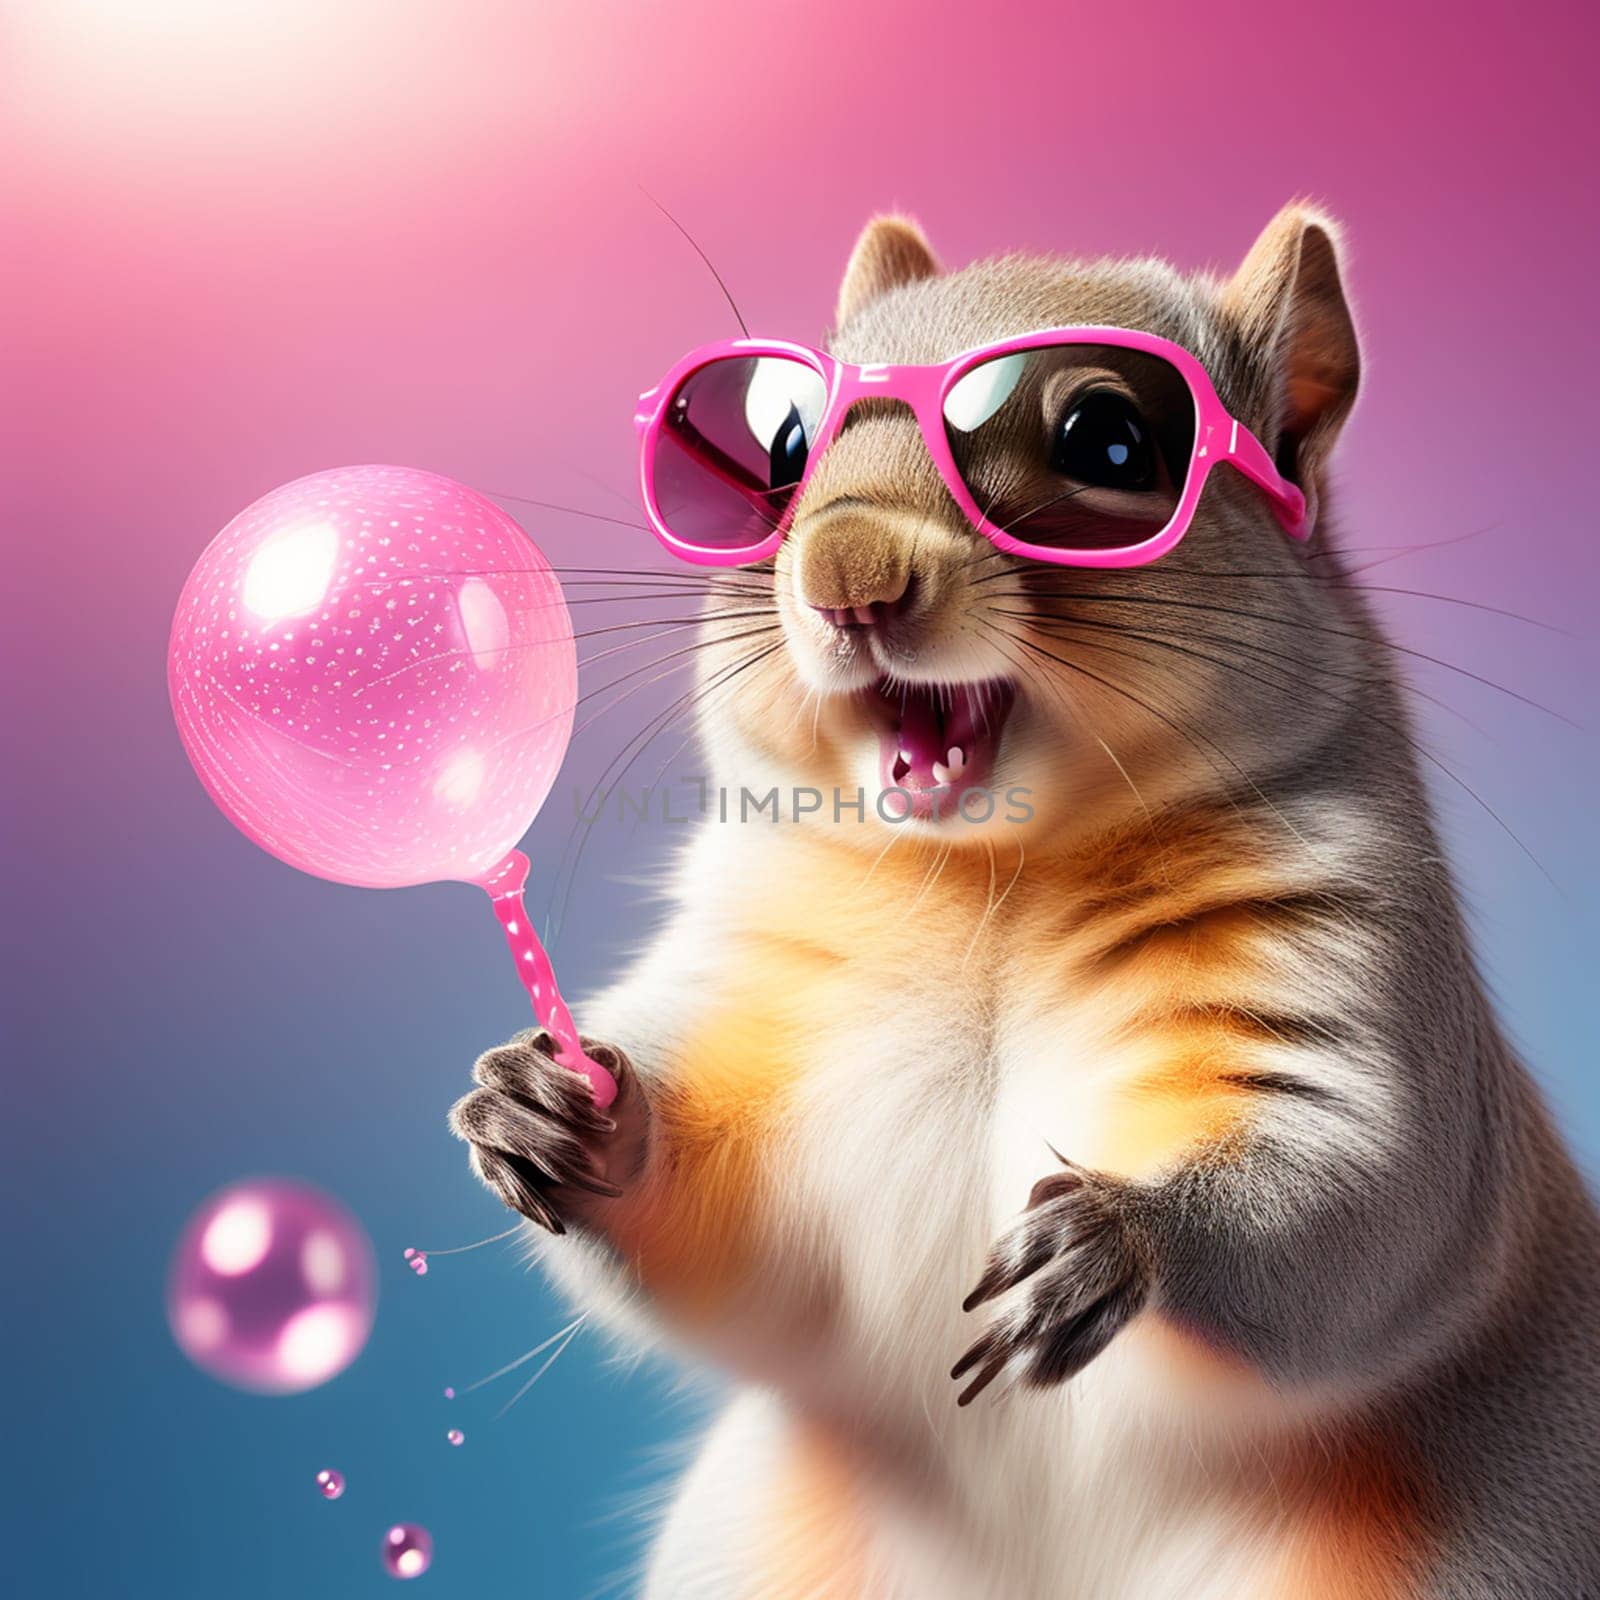 squirrel, kangaroo in a denim jacket and pink shirt with pink glasses with a round tasty lollipop on a pink background by Ekaterina34